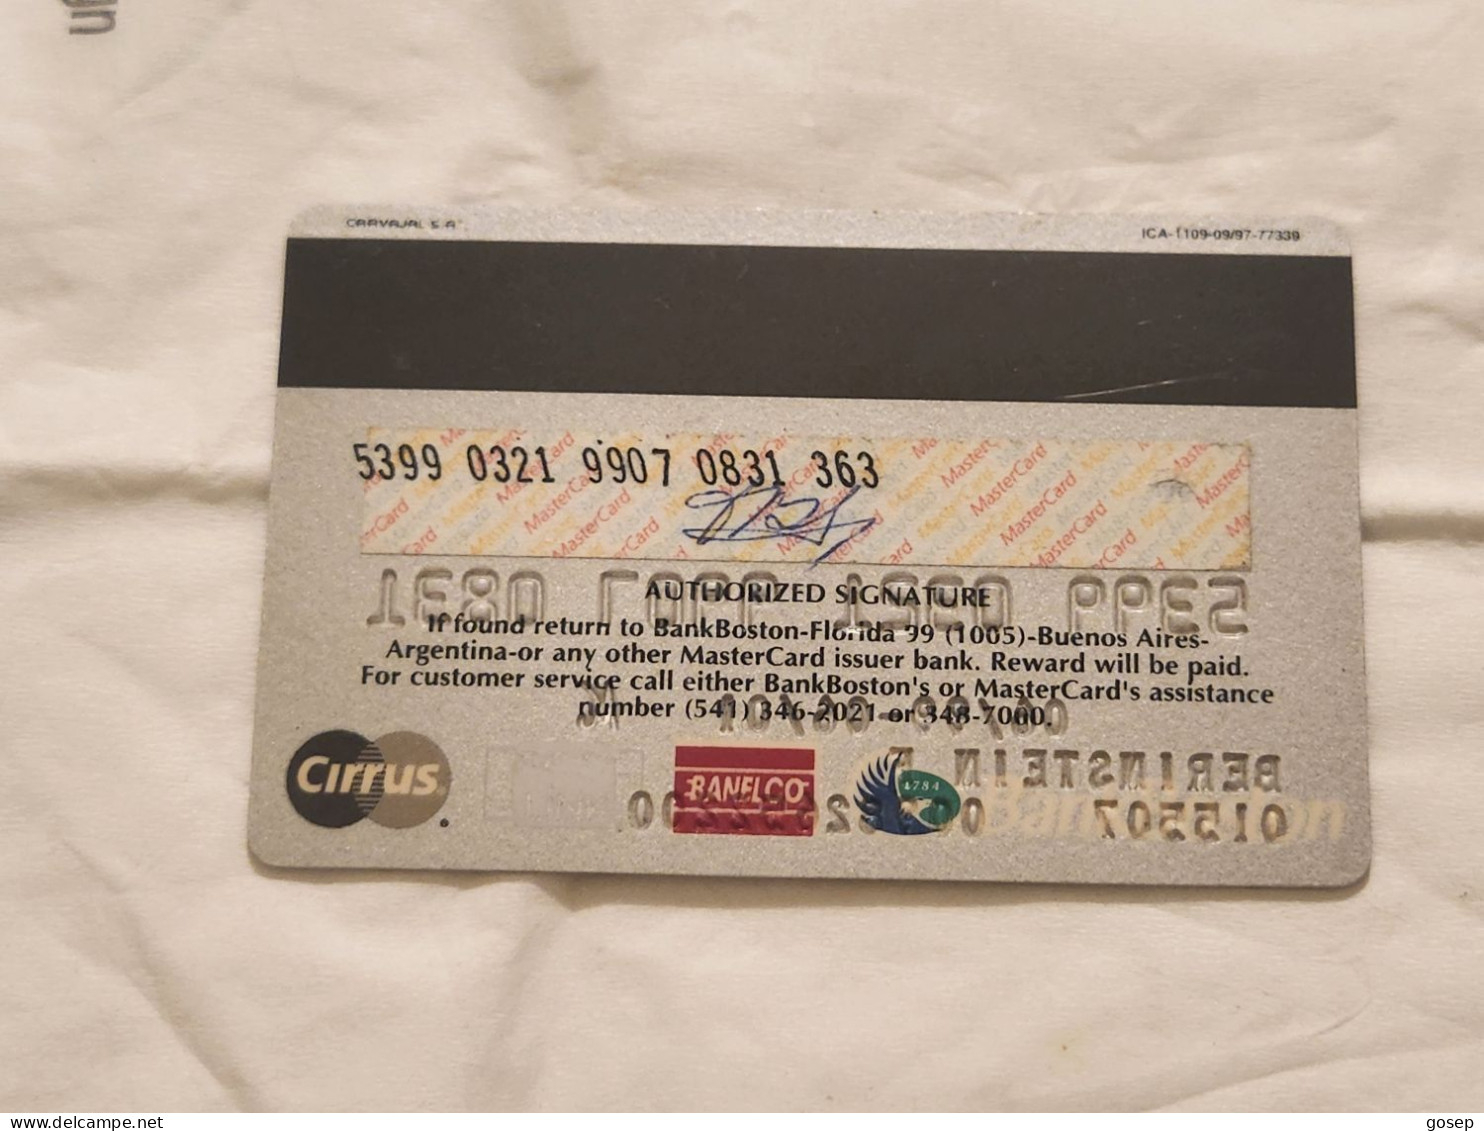 UNITED STATES-MILEAGE PLUS-BANK BOSTON CREDICT-MASTER CARD-(5399-0321-9907-0831)-(BERINSTEIN F)-used Card - Credit Cards (Exp. Date Min. 10 Years)